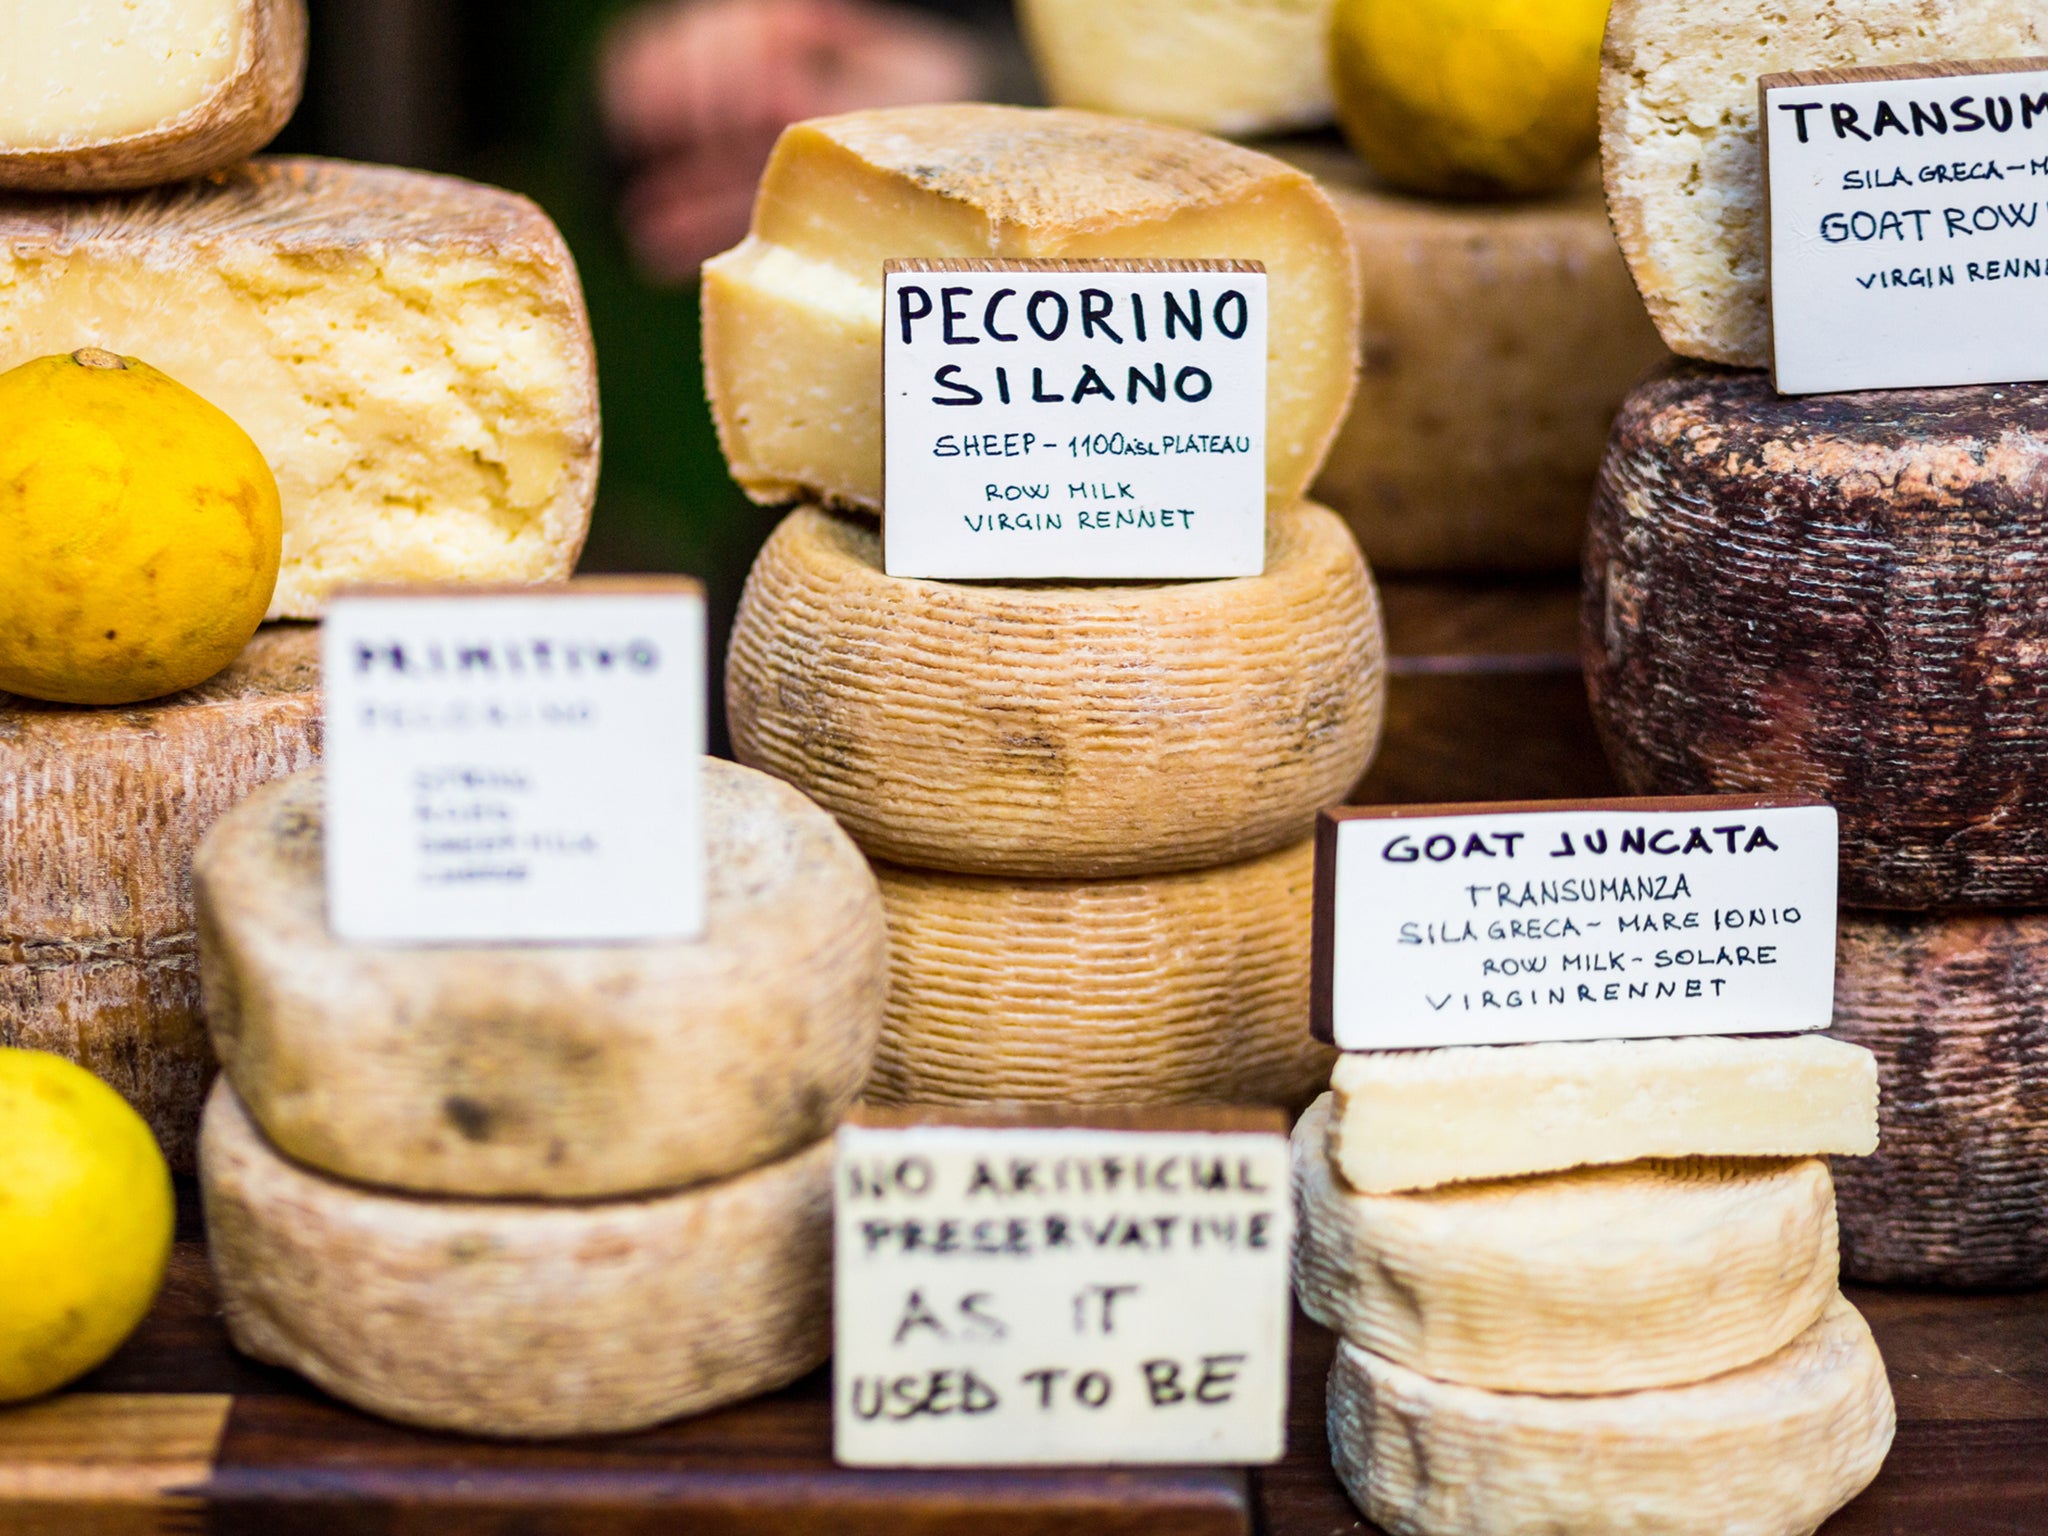 ‘Nowhere else on the planet have I seen such a concentration of supremely good cheeses’